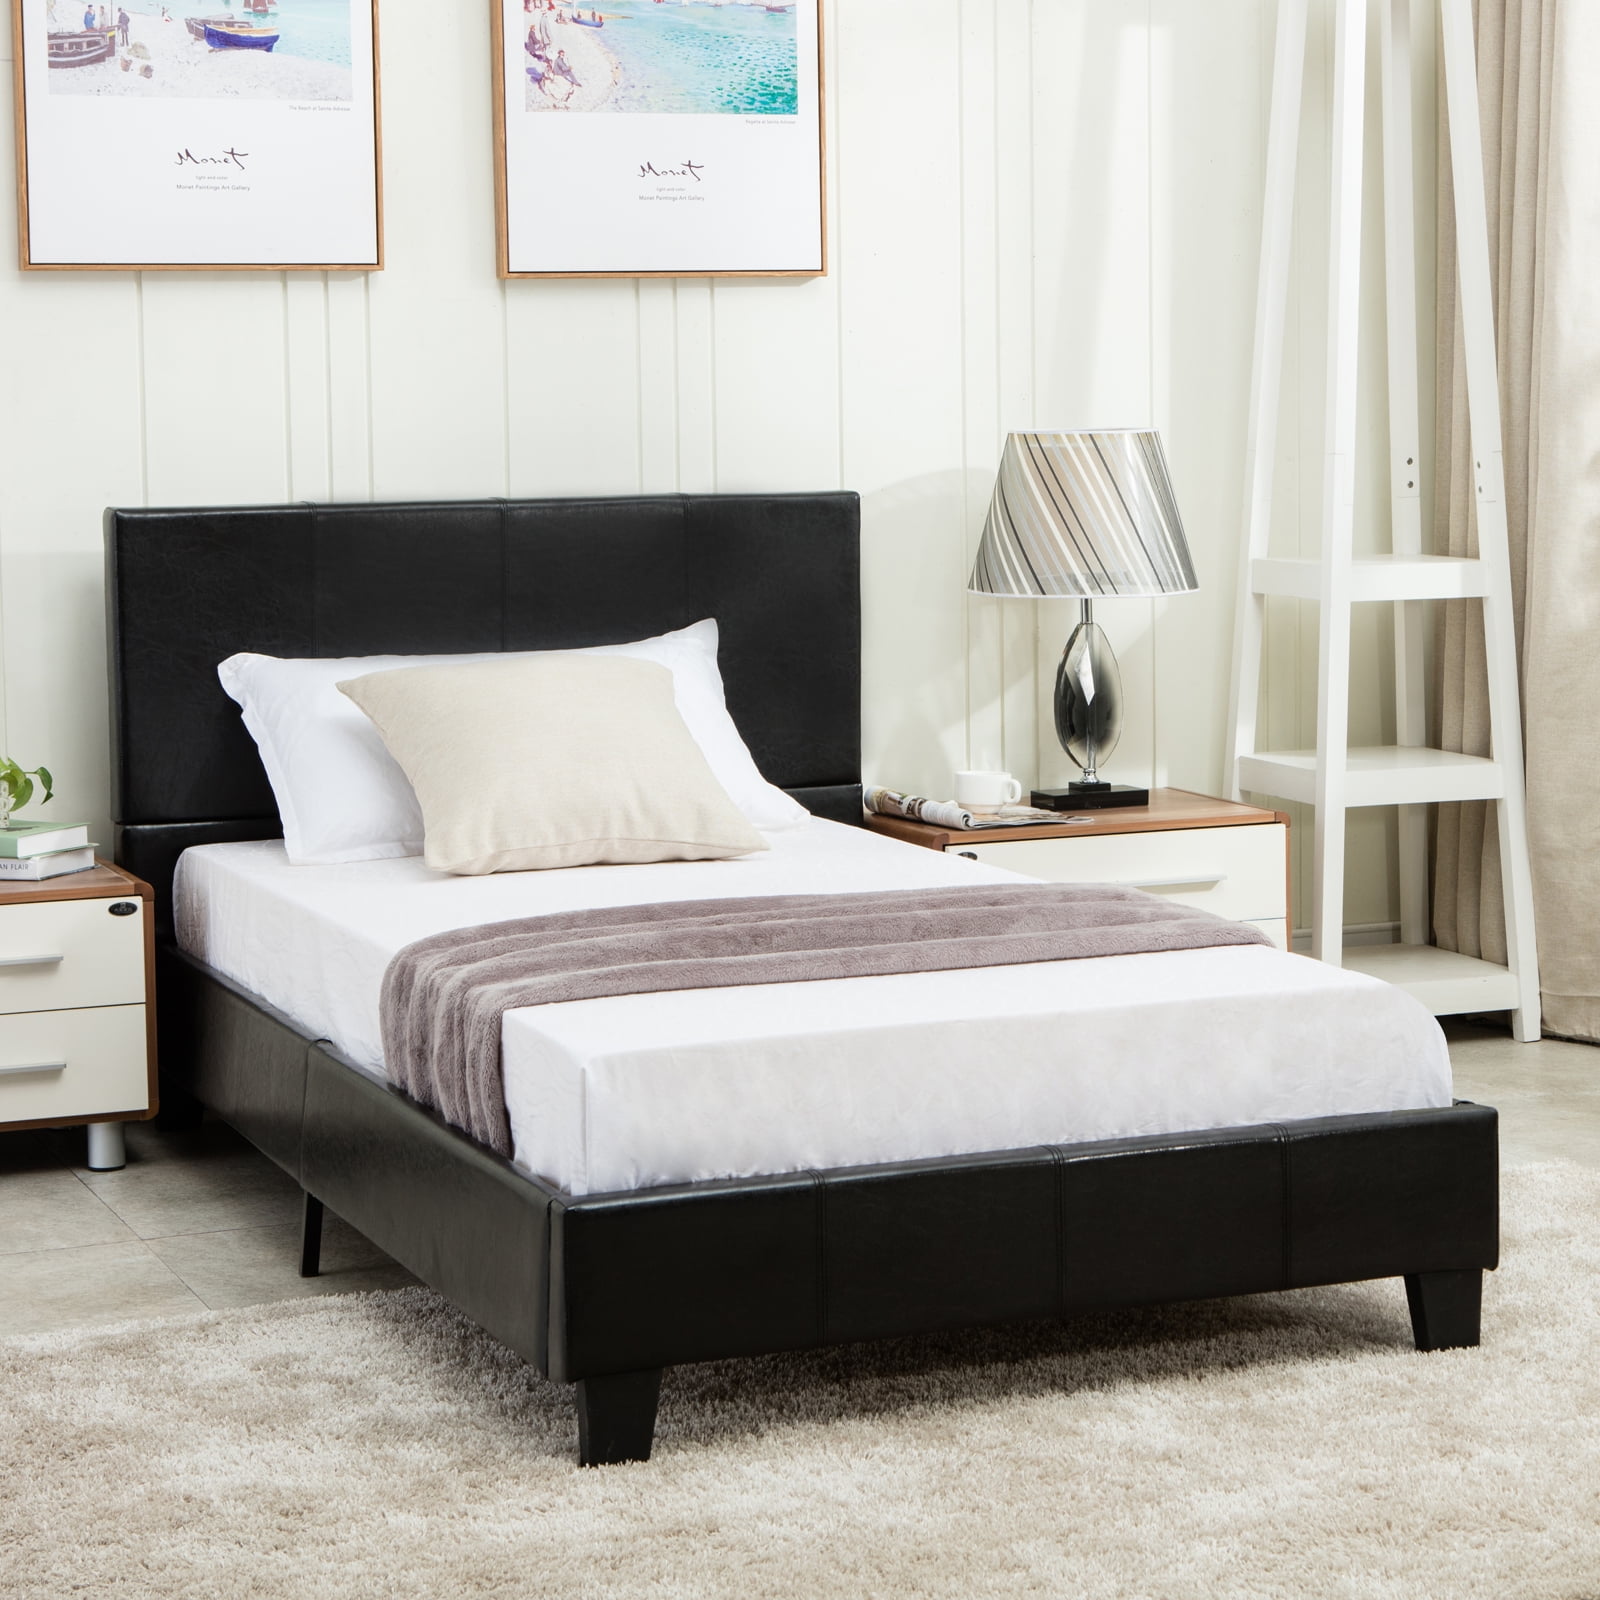 Mecor Bed Upholstered Headboard Bedroom, Twin Bed Fabric Headboards